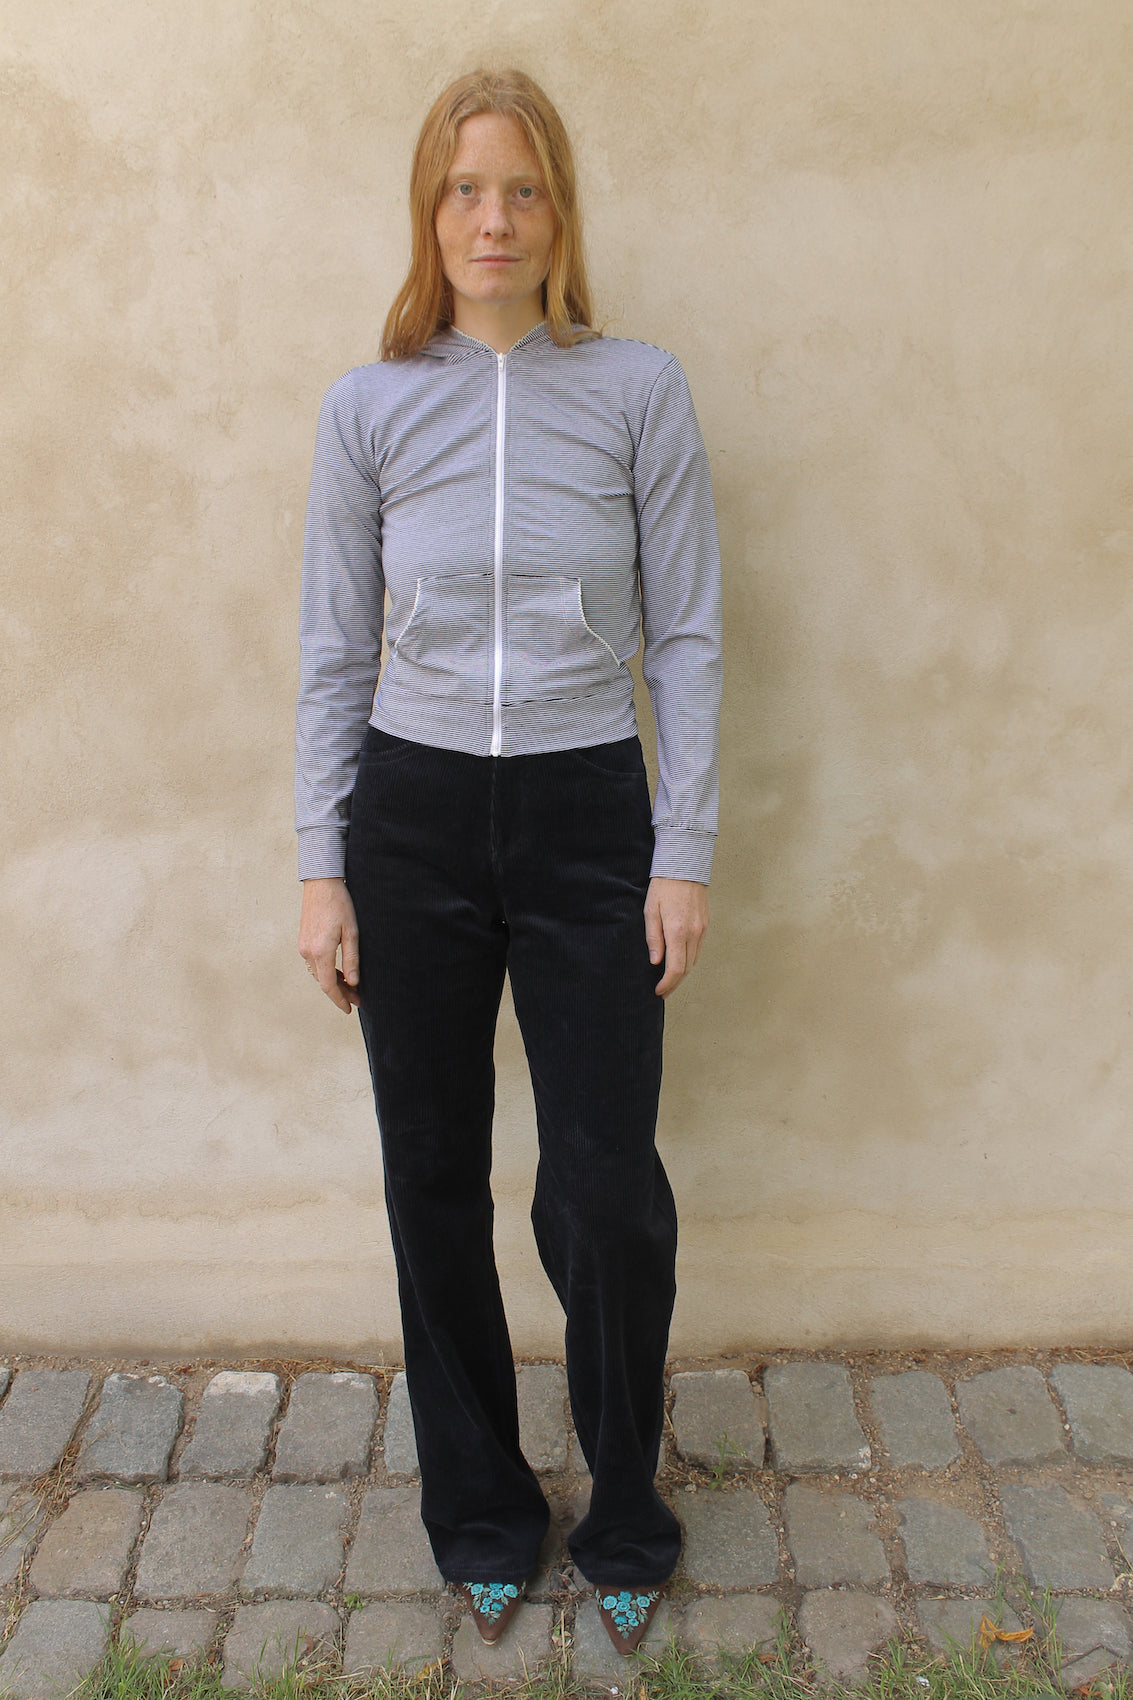 Caro Editions' new signature line in jersey cotton.  The Caro PJ Hoodie is a slightly fitted style with long sleeves, a zipper opening on the front, and embroidered Caro Editions logo on the back.   Also available in Red White stripe.  Style the Caro PJ Hoodie under a jacket or shirt, with matching Caro PJ Leggings, jeans, or a skirt.  Material: 95% cotton, 5% elastane. Bow: 100% Polyester.  The model is 179cm (5'10") and is wearing a size S.